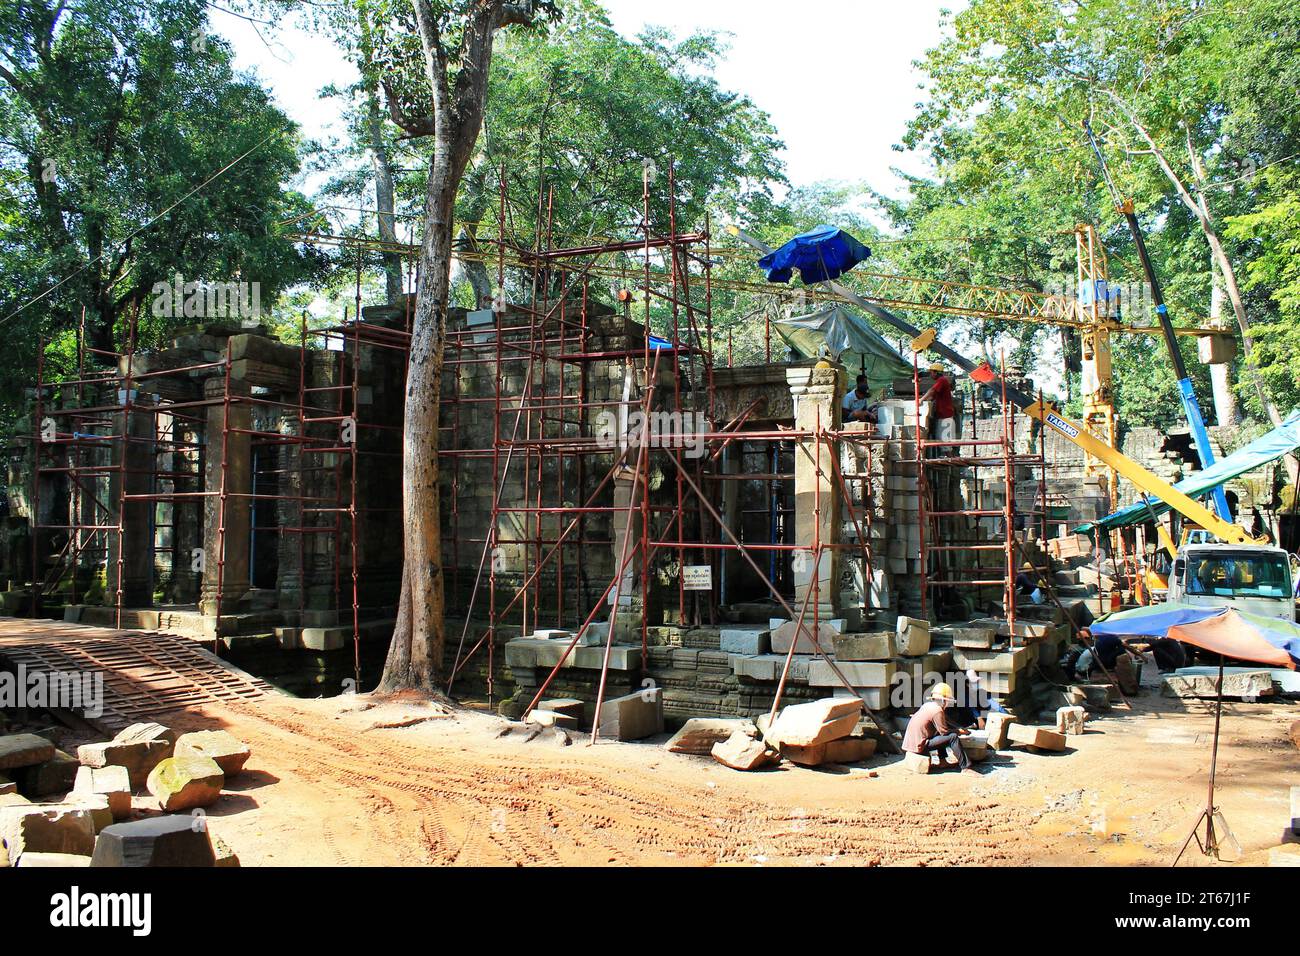 Reconstruction efforts continue nonstop among the ruins in the Angkor Archaeological Park, Cambodia. The ancient temple complex covers some 400 acres Stock Photo